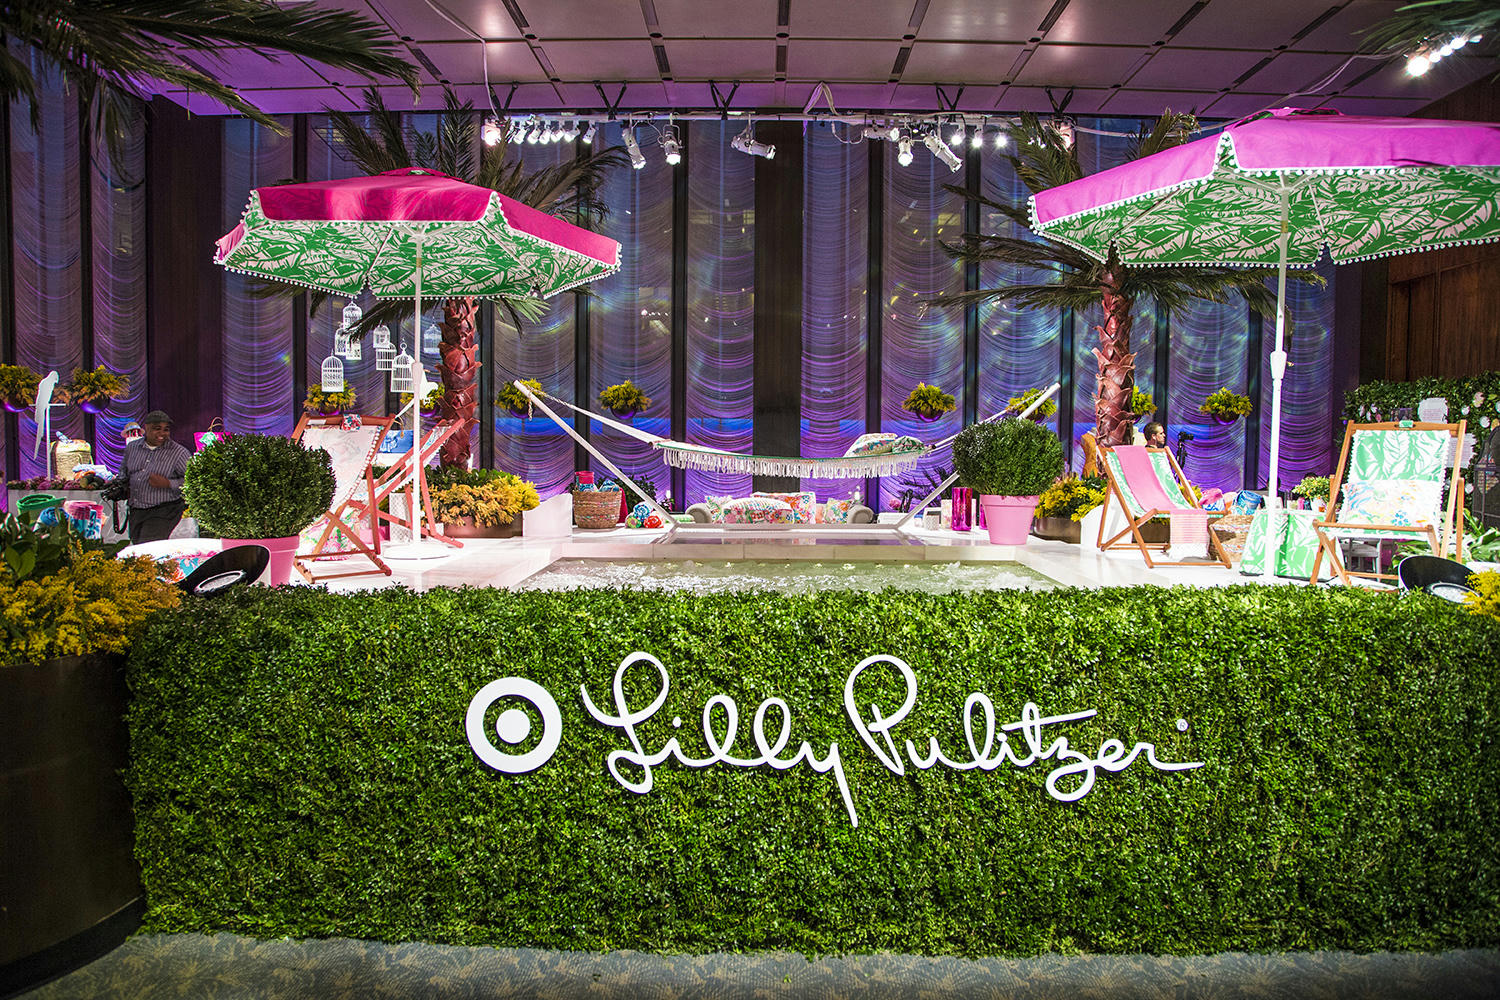  Target is partnering with Lilly Pulitzer on Spring Collection